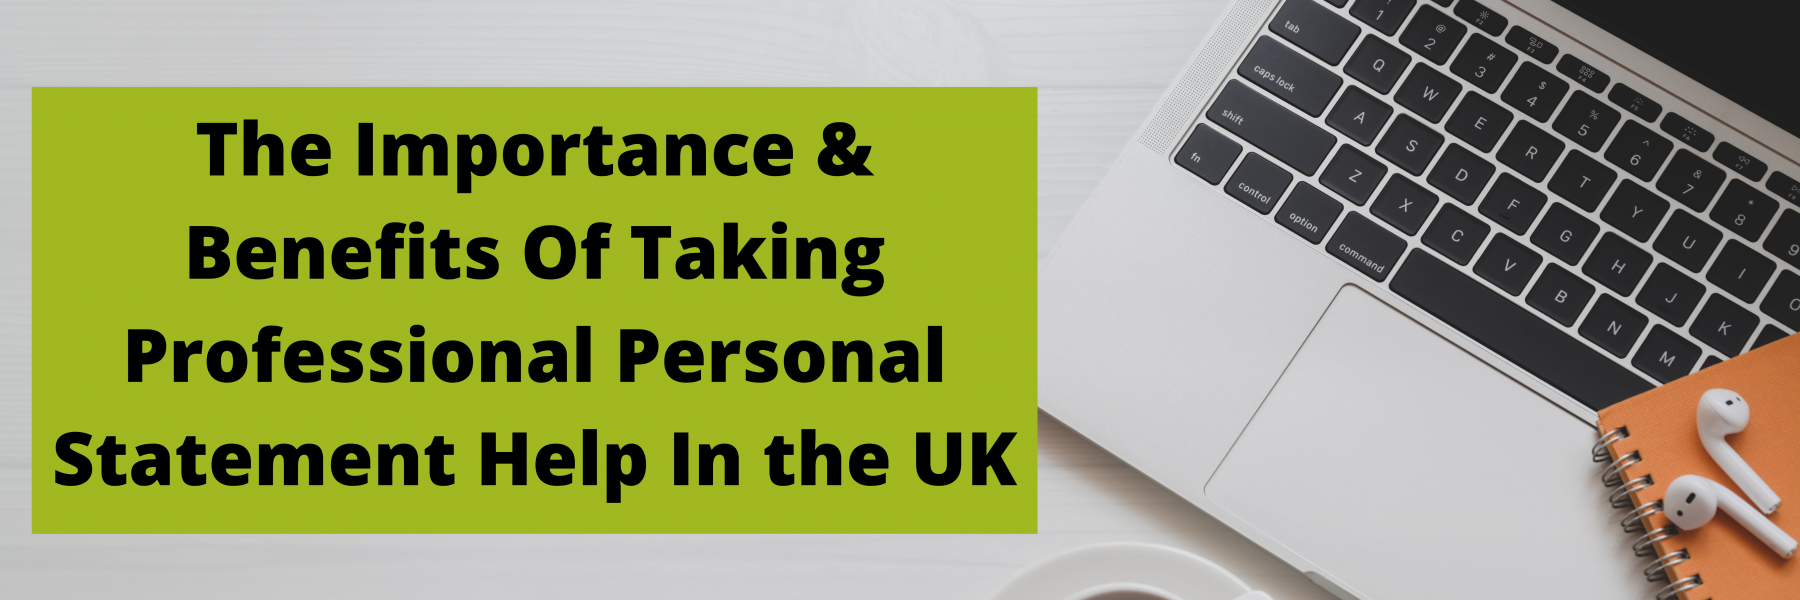 benefits of taking professional personal statement help in the UK by personal statement writer